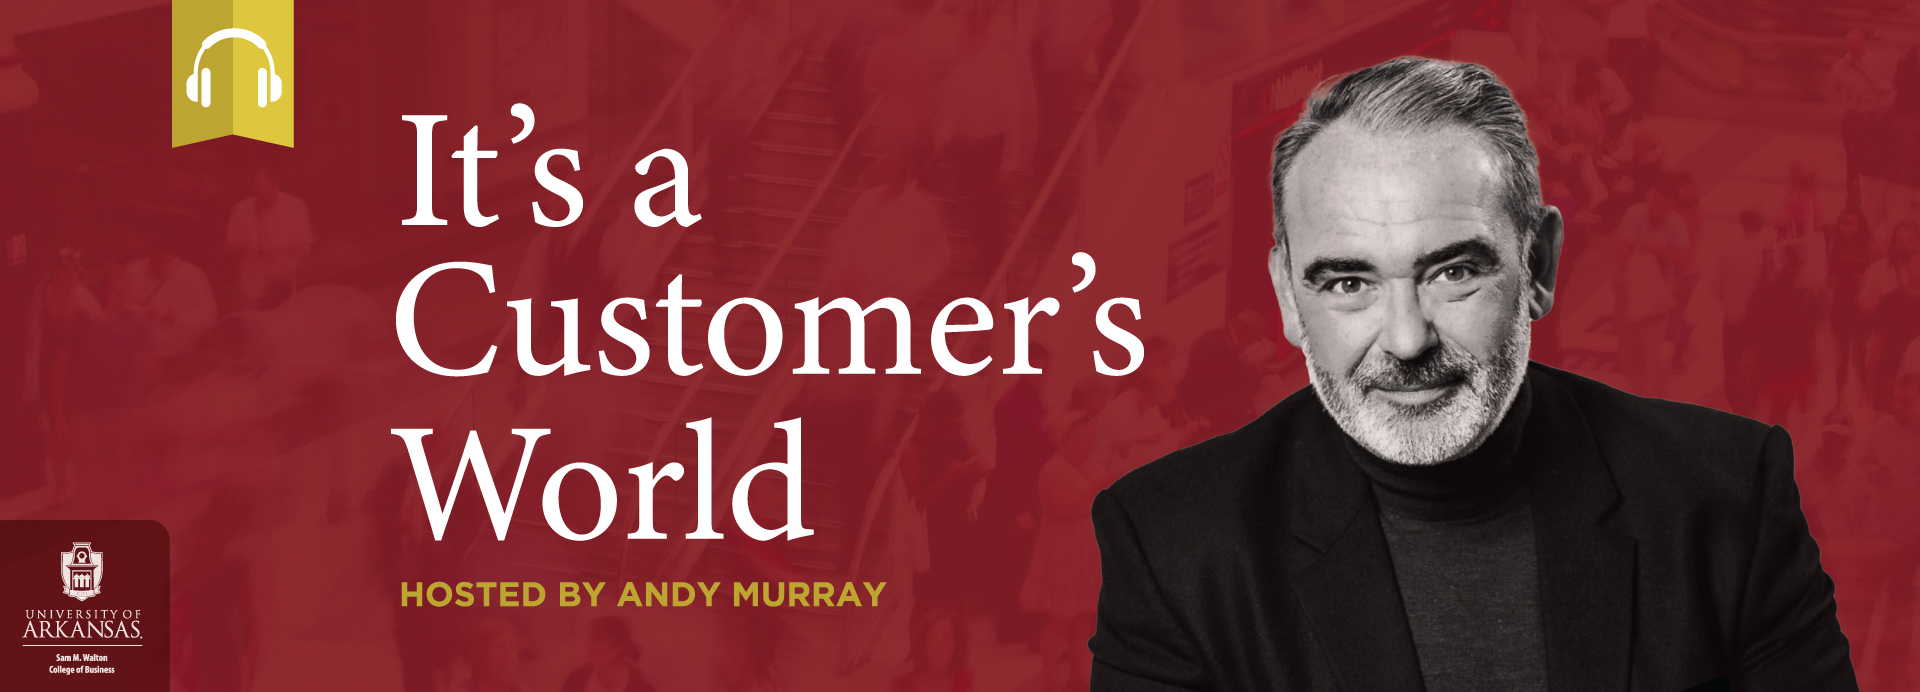 It's a Customer's World. Hosted by Andy Murray.